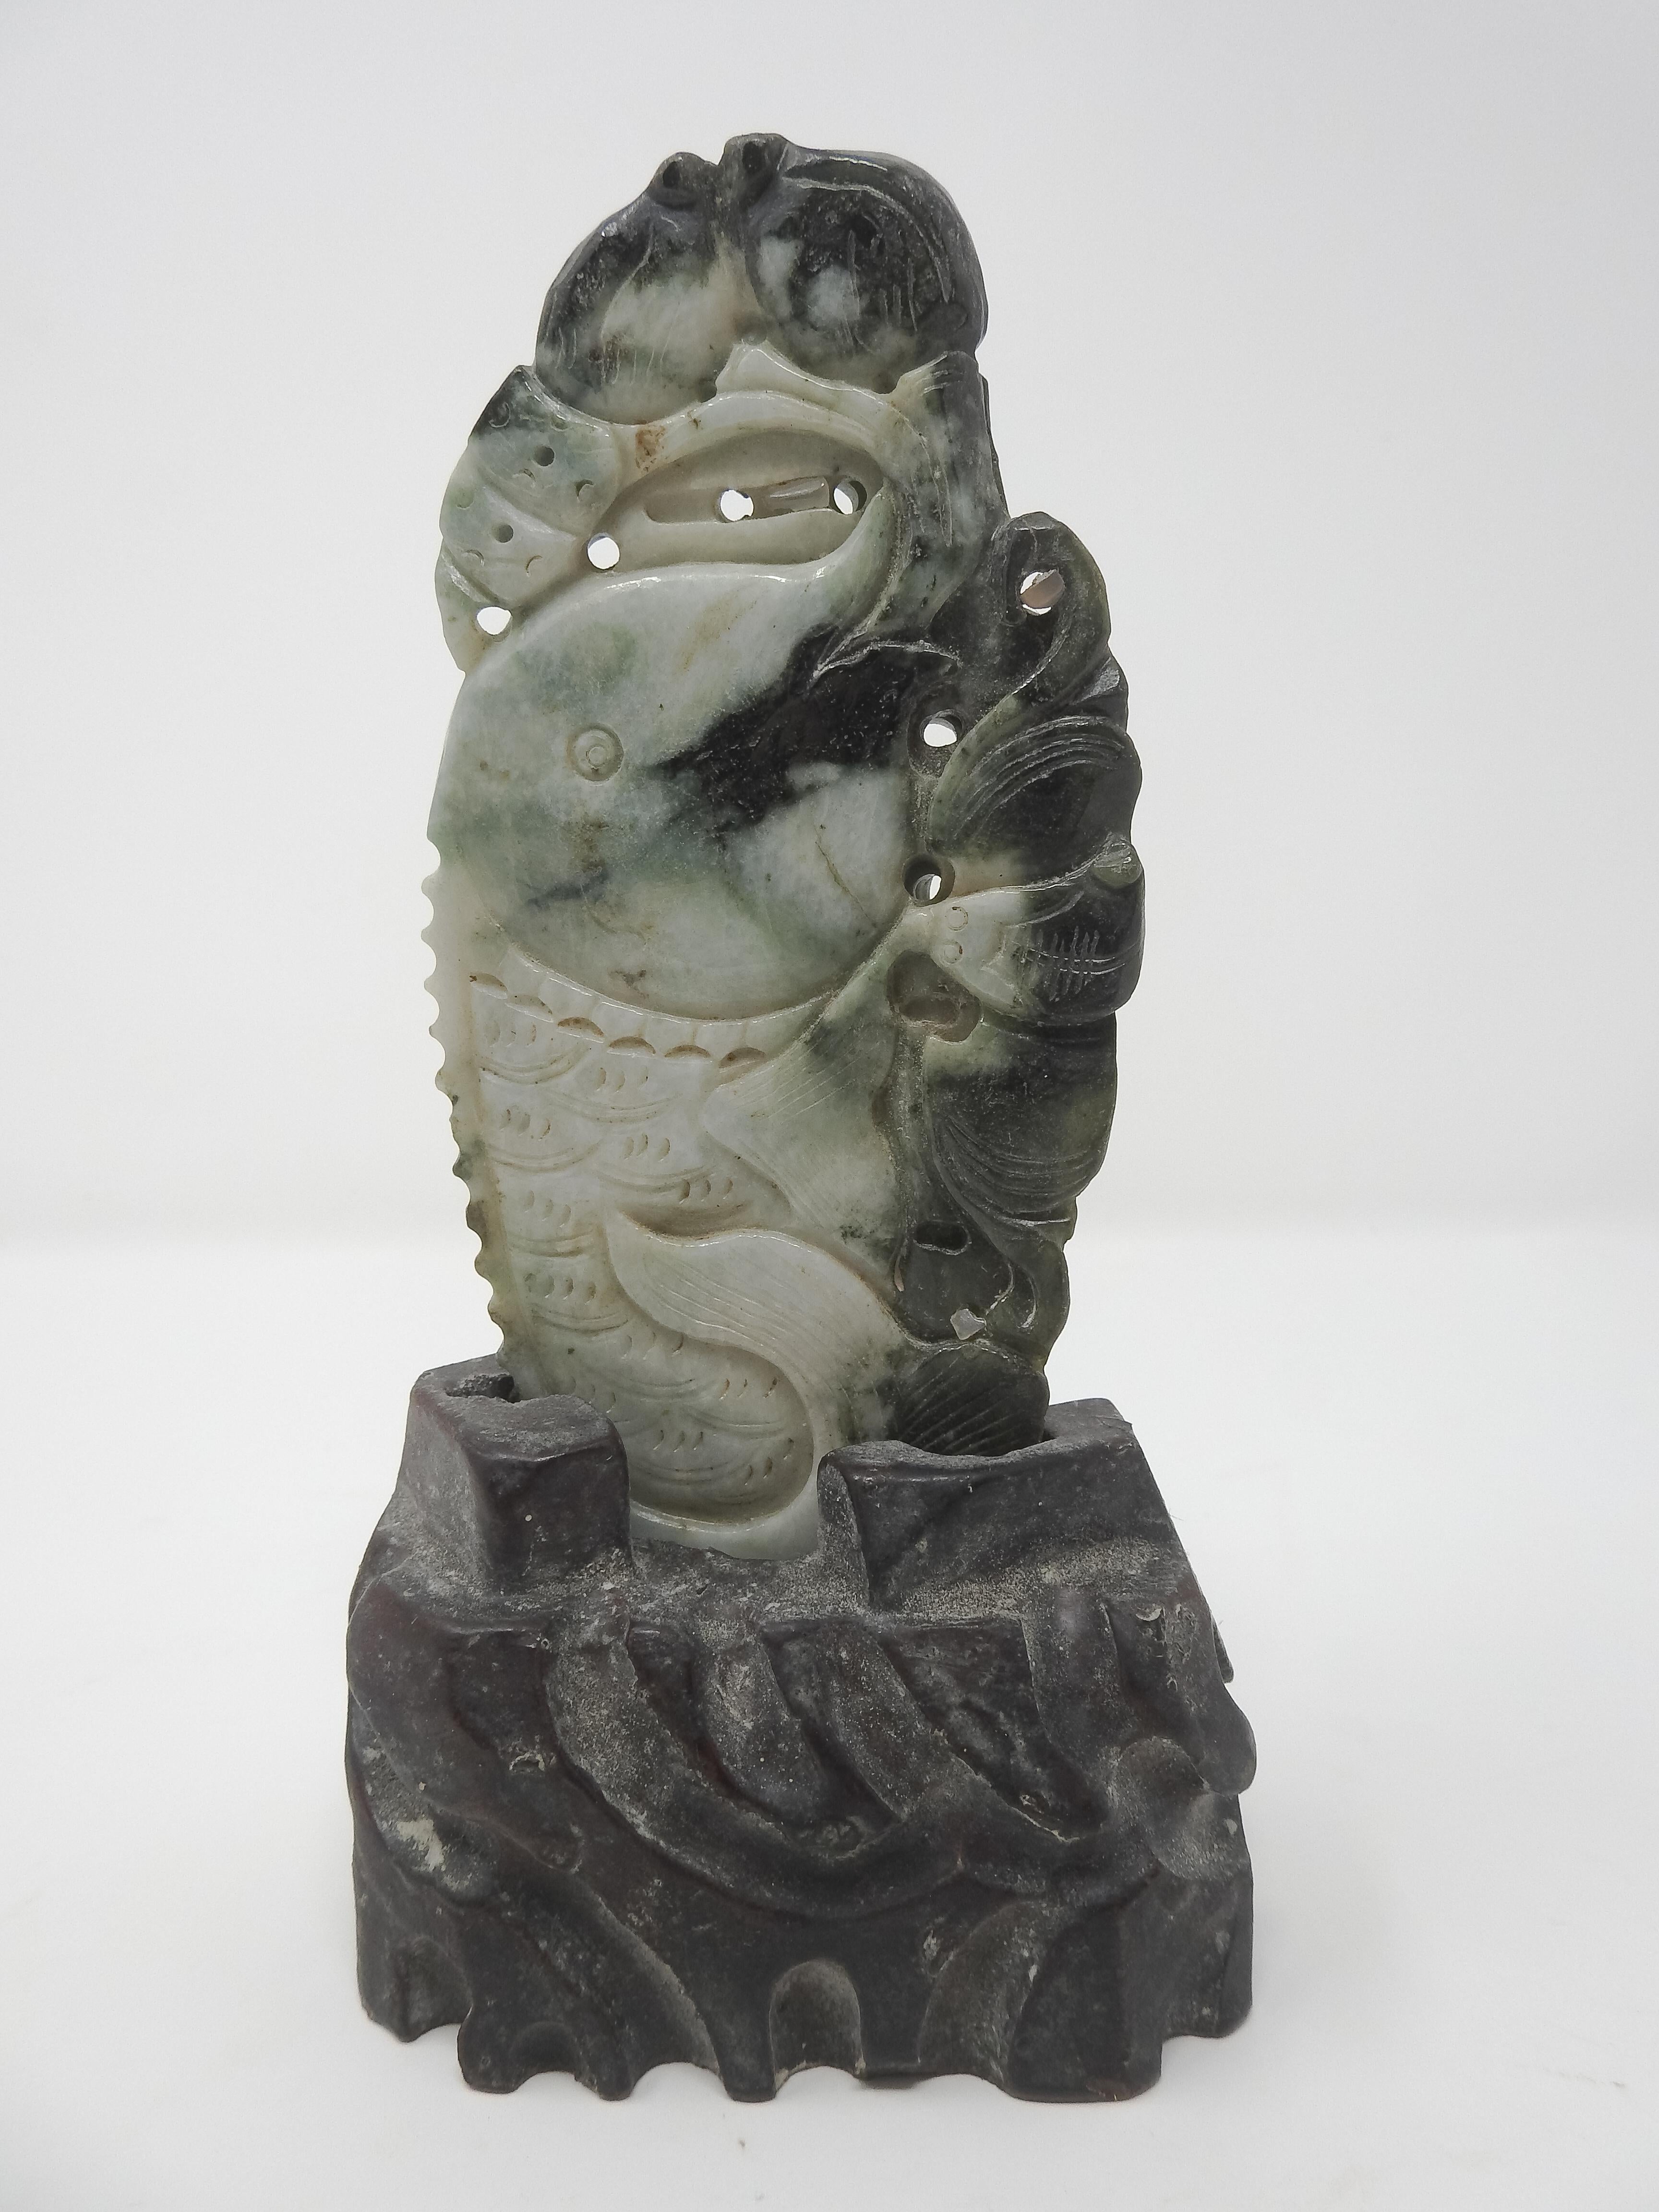 Offering this Chinese soapstone carving on a stone base. The base has channels that are cutout in gentle curves. The soapstone is double sided and has a Koi fish carved in. Around the fish is many different scrollwork details.